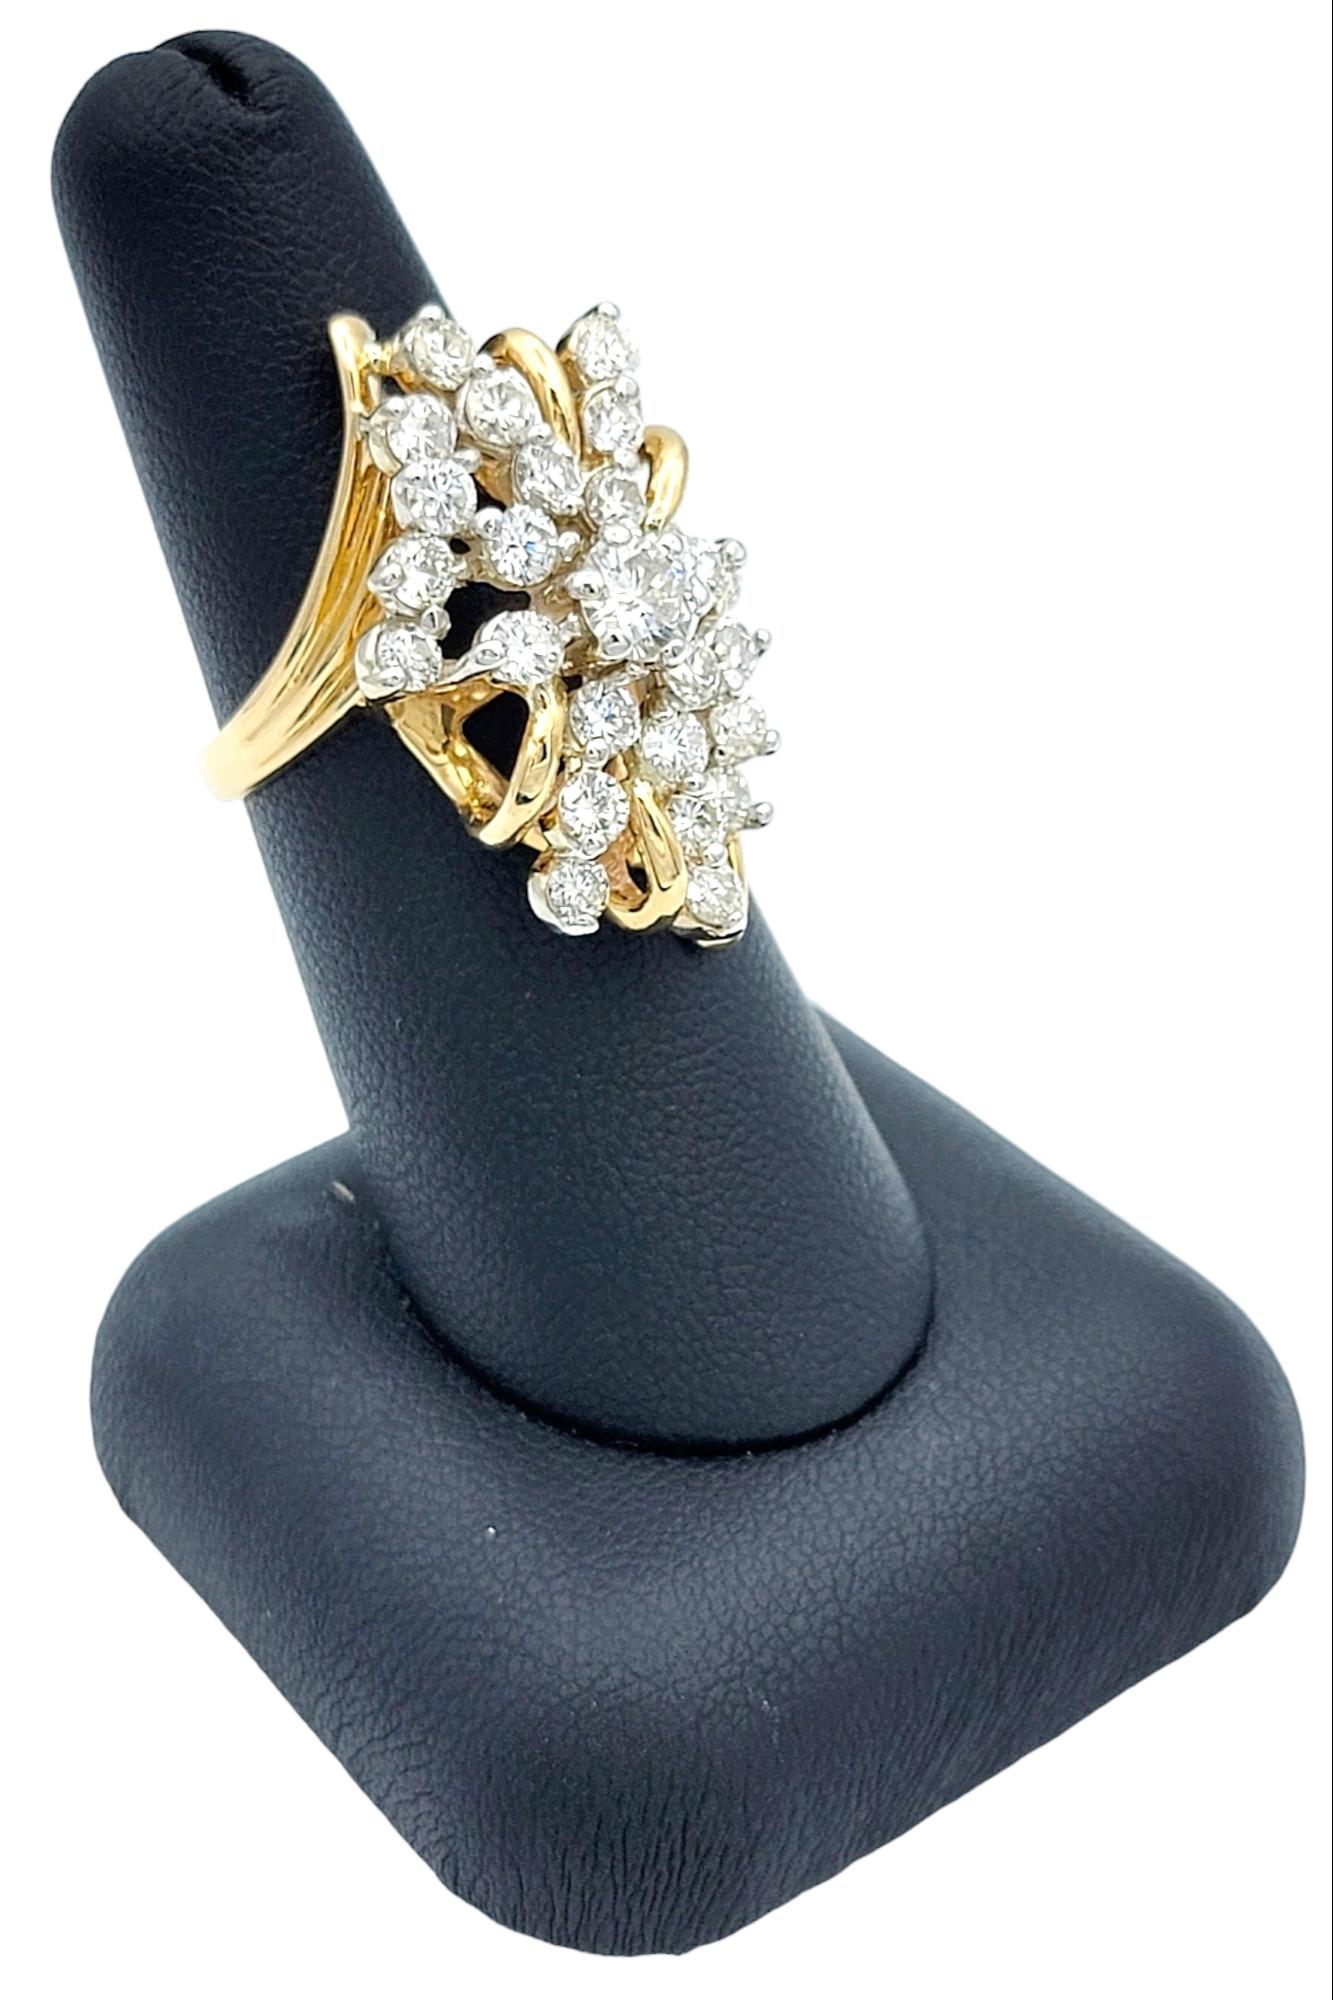 3.01 Carat Total Round Diamond Elongated Cluster Ring in 14 Karat Yellow Gold For Sale 4